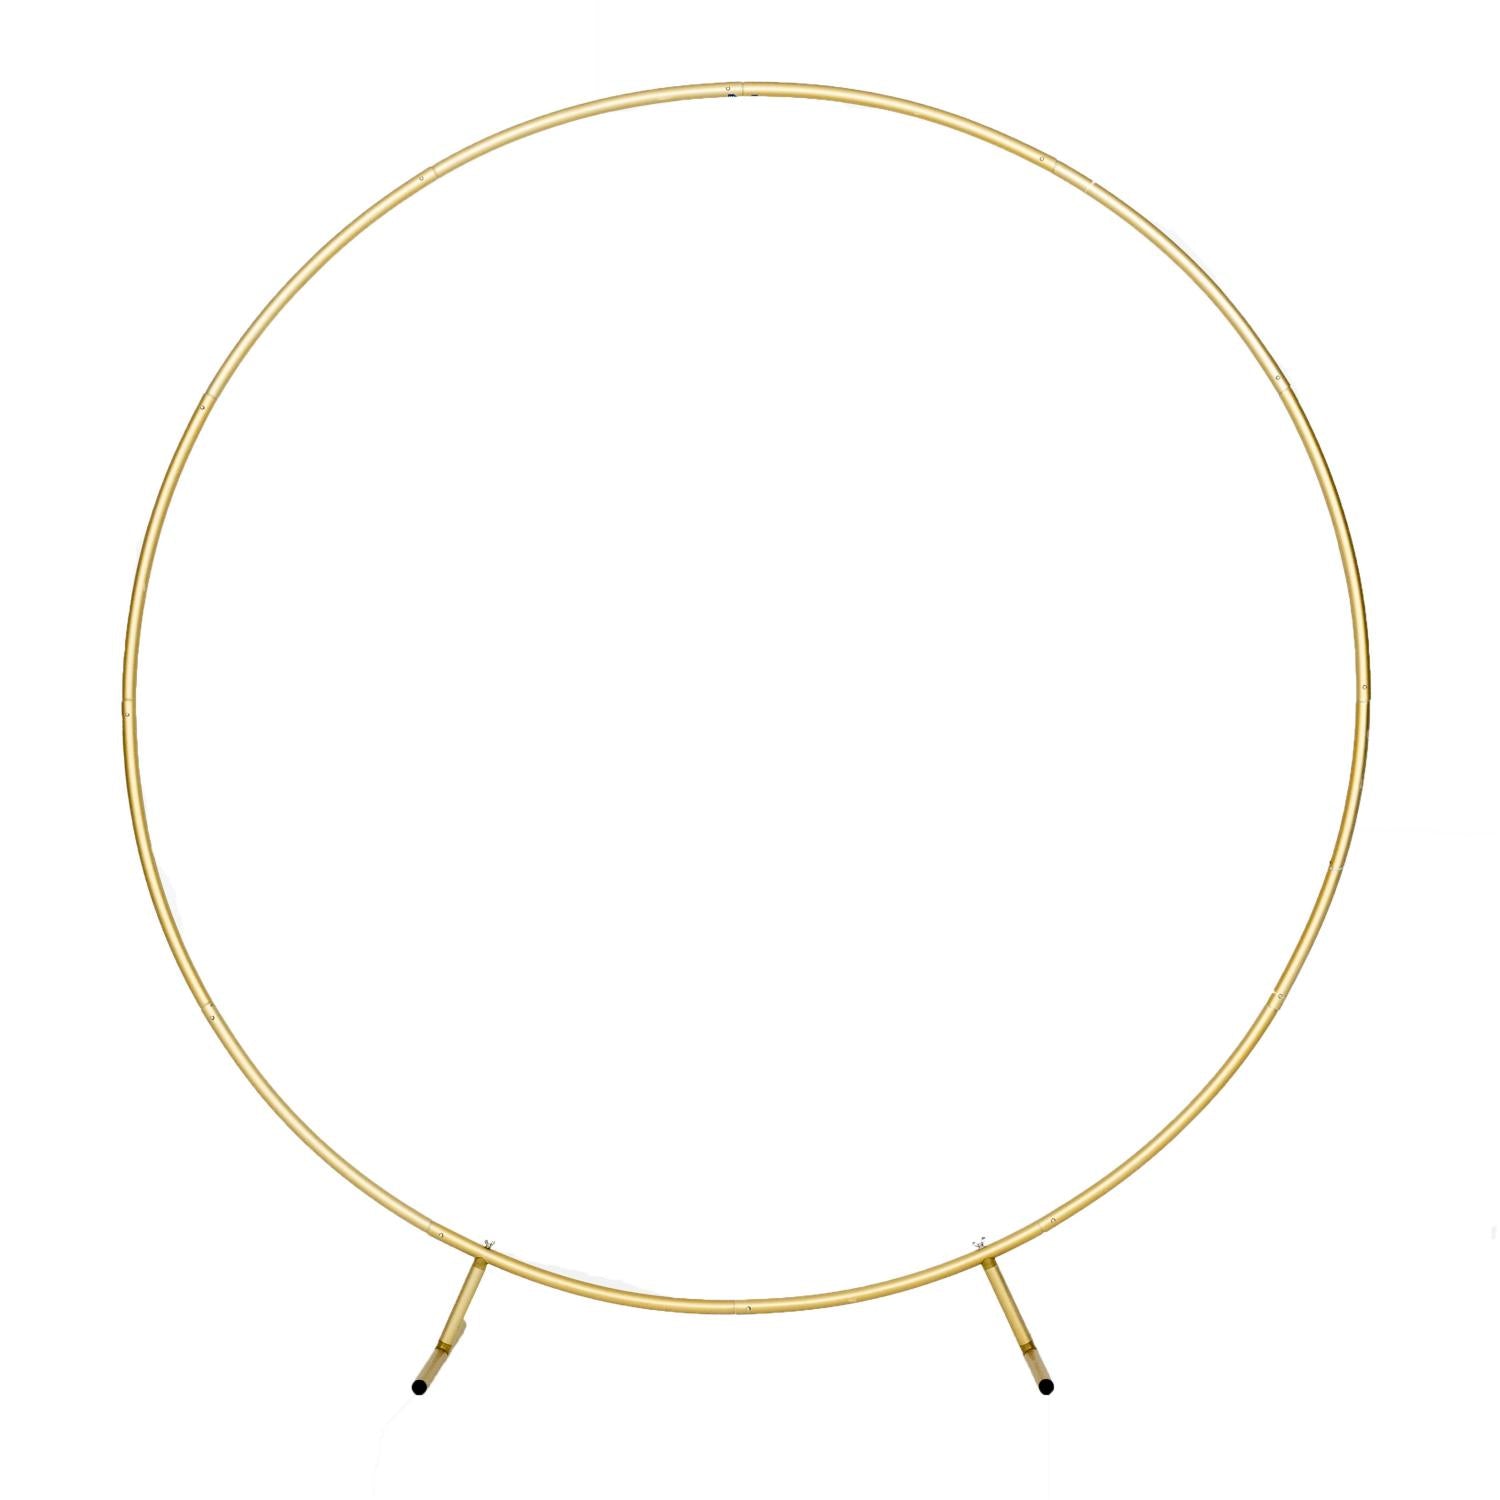 Round Stand Gold 6.5x6.5ft(2x2m) Aluminum Frames for Balloon Party Decor Wedding Ring Flower Arch